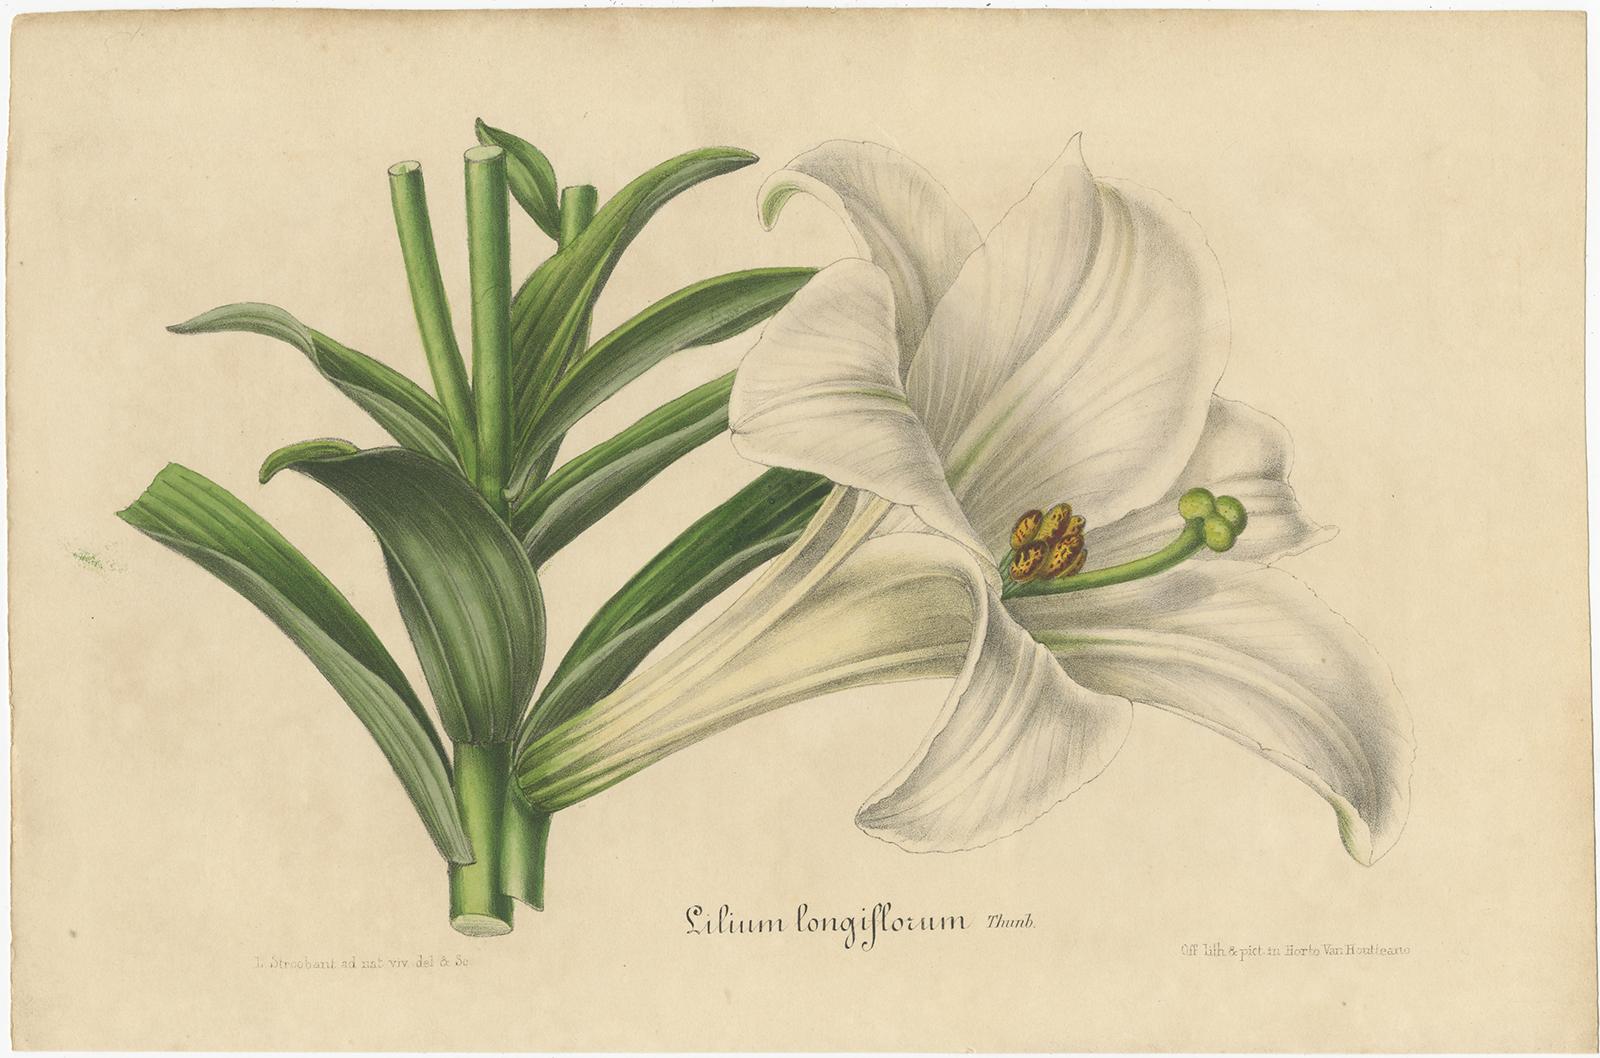 Set of two antique botany prints titled 'Lilium Longiflorum - Lilium Cordifolium'. It depicts the lilium longiflorum (Easter lily) and lilium cordifolium (heart-leaved lily). These prints originate from volume 3 of 'Flore des Serres' by Louis van